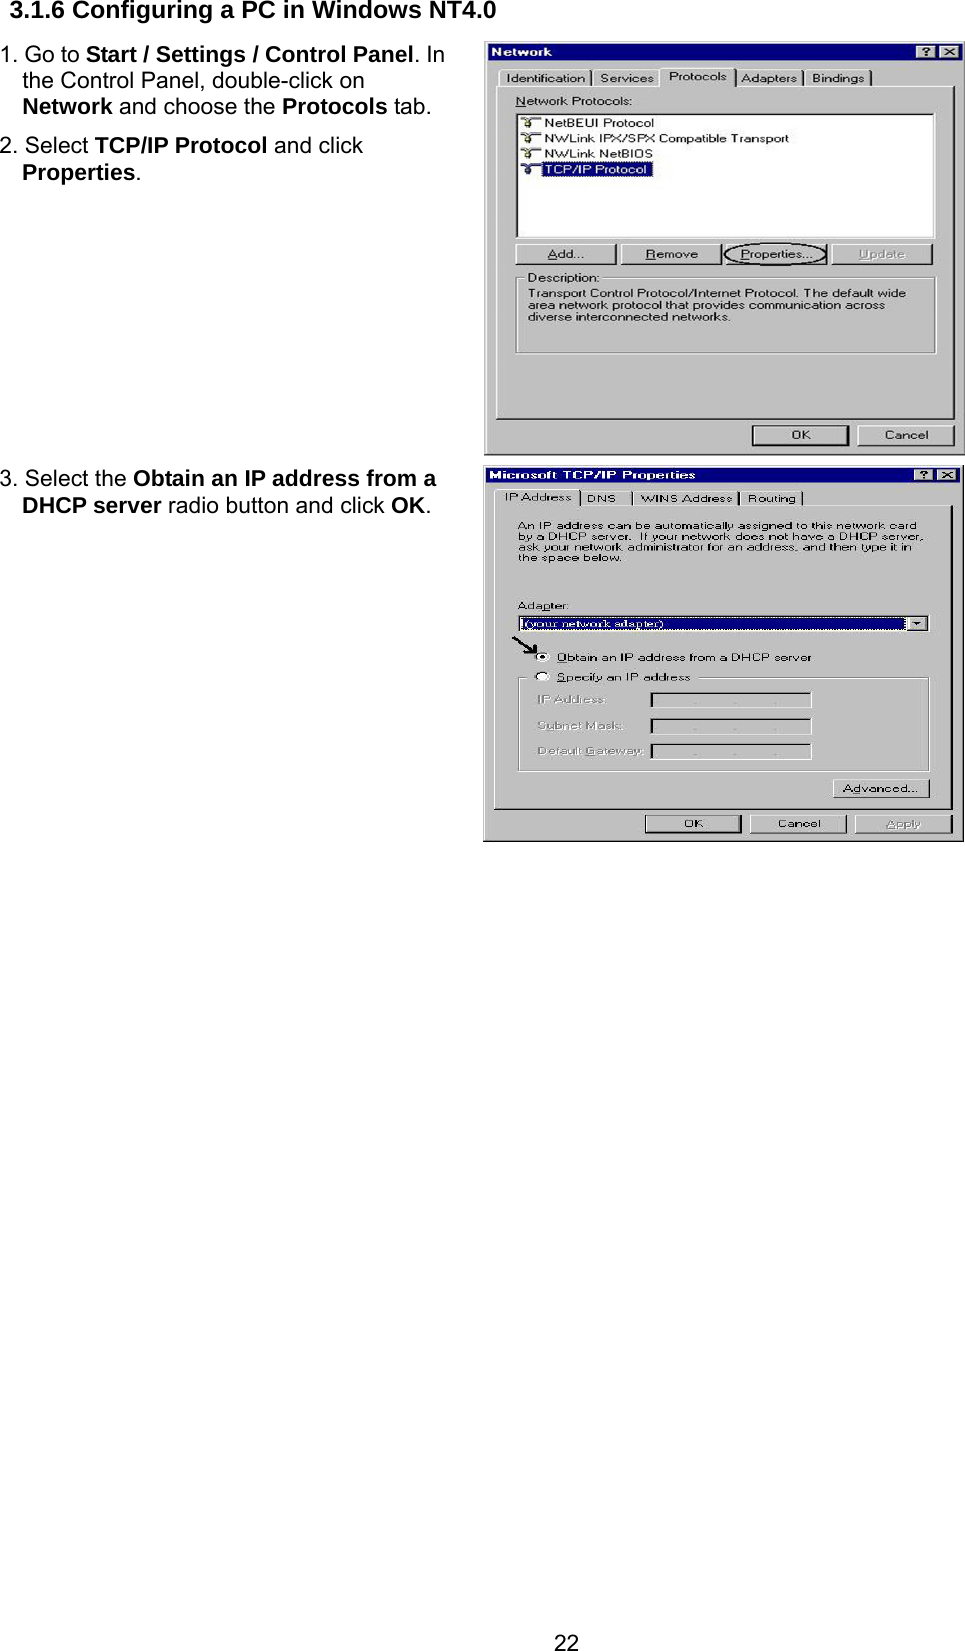 22 3.1.6 Configuring a PC in Windows NT4.0 1. Go to Start / Settings / Control Panel. In the Control Panel, double-click on Network and choose the Protocols tab. 2. Select TCP/IP Protocol and click Properties.   3. Select the Obtain an IP address from a DHCP server radio button and click OK.                    